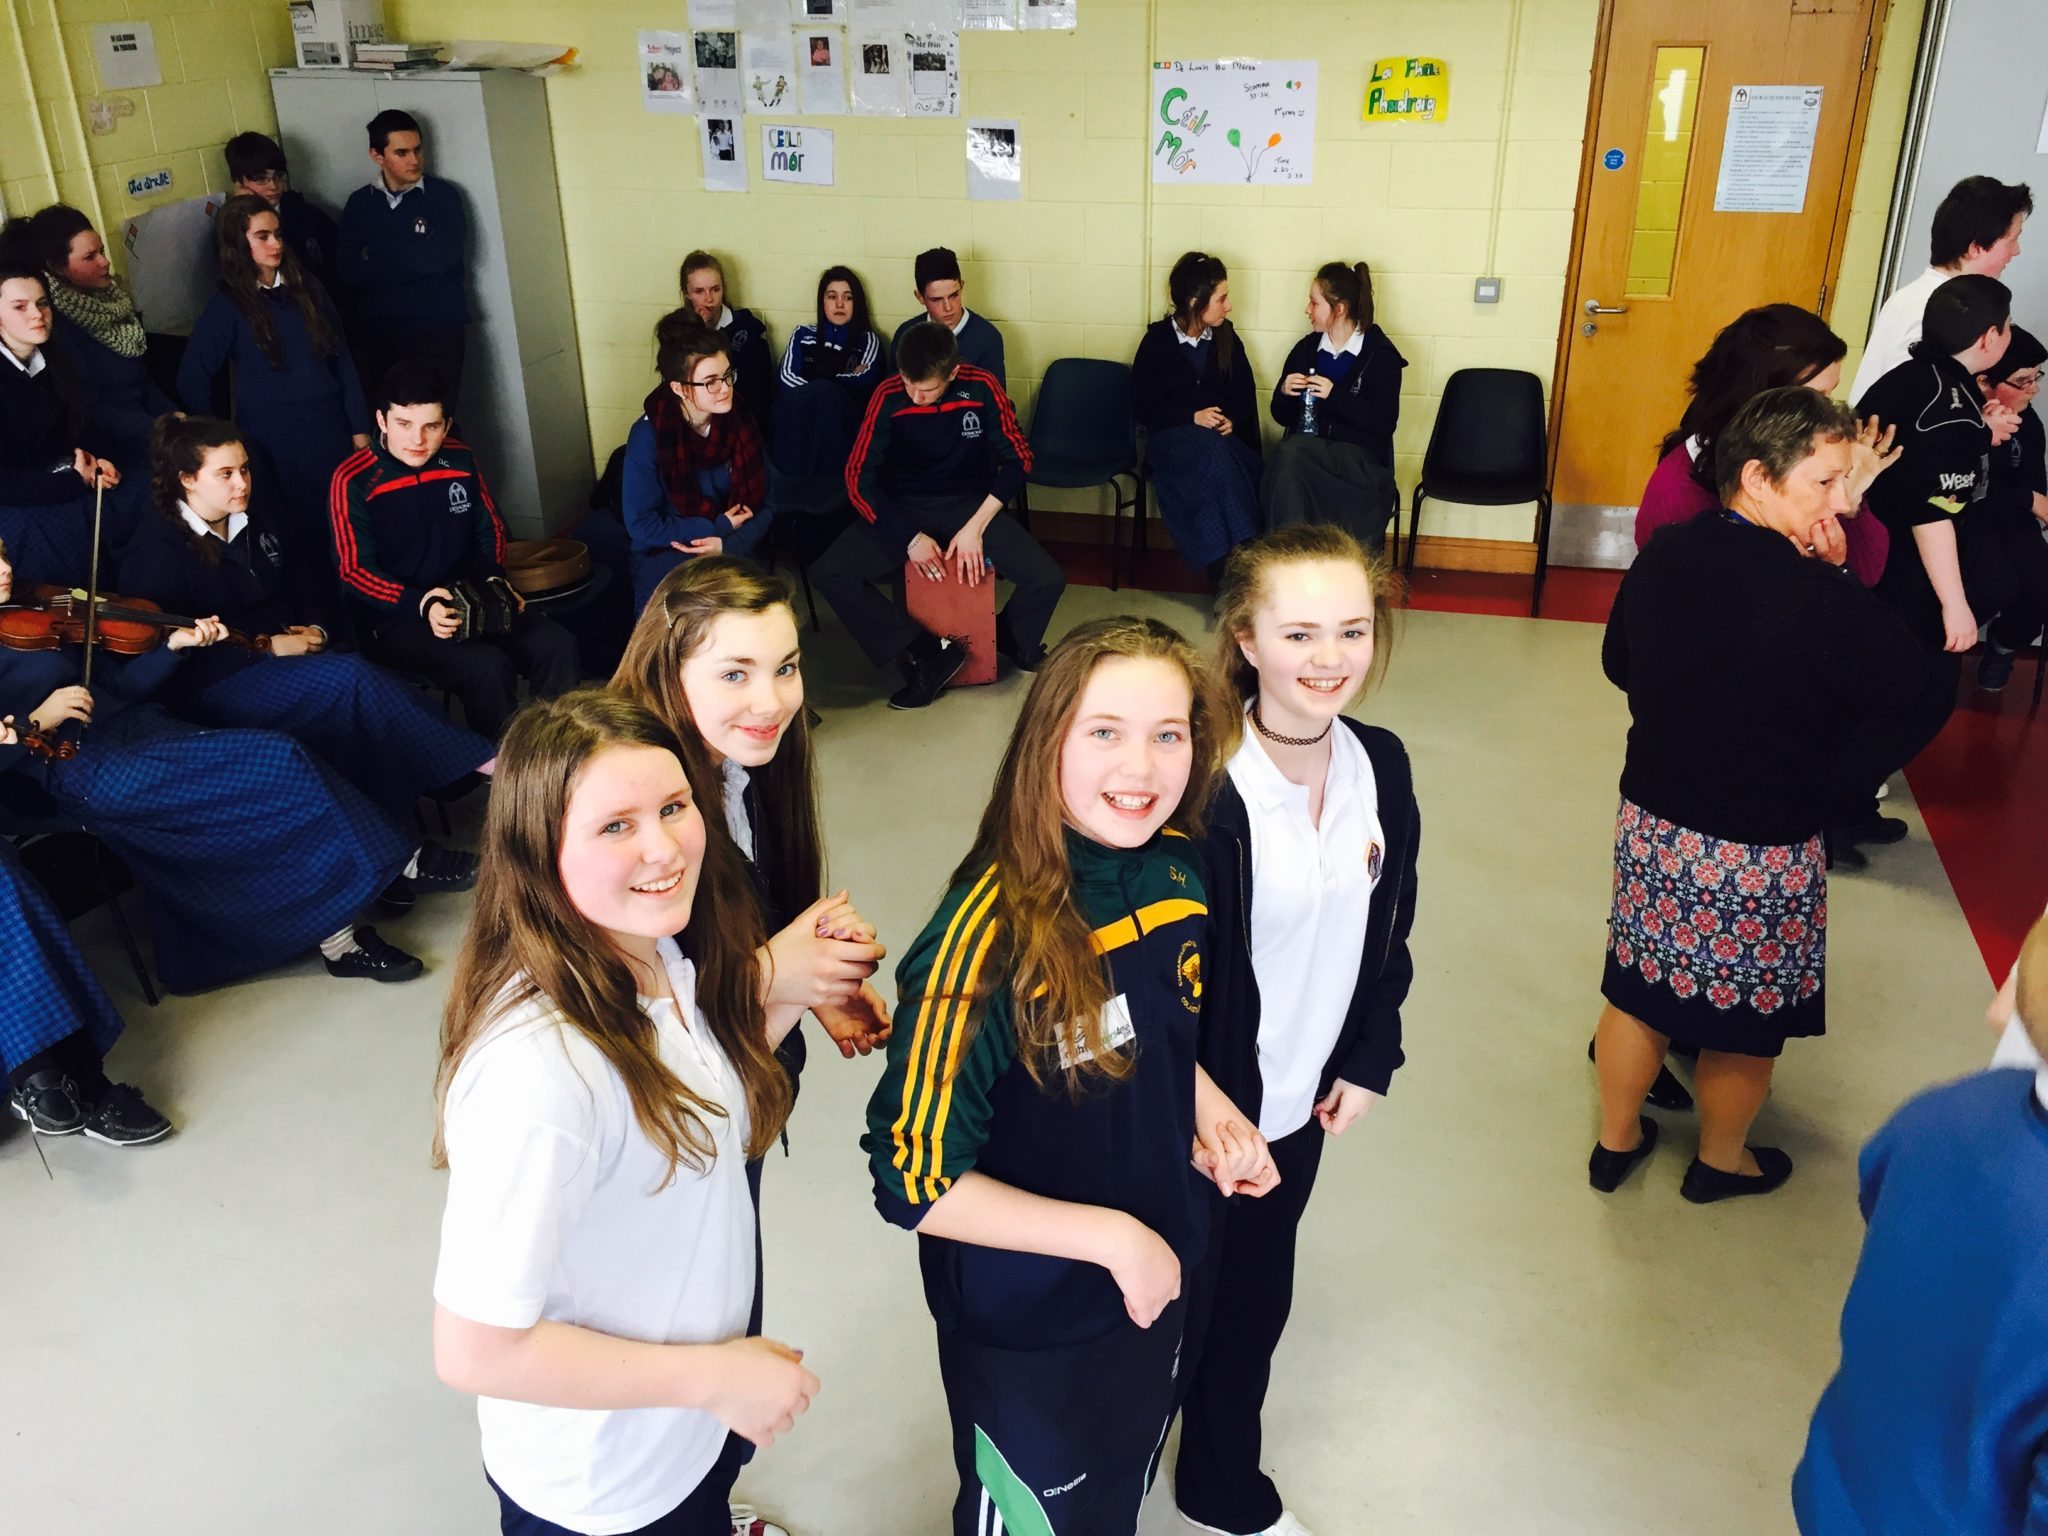 Siobhan Hurley, Kelli Gayer,Sophie Leenders and Eve Mountgomery all First Year students getting ready to ‘Shoe the Donkey’ at the Irish Céilí.